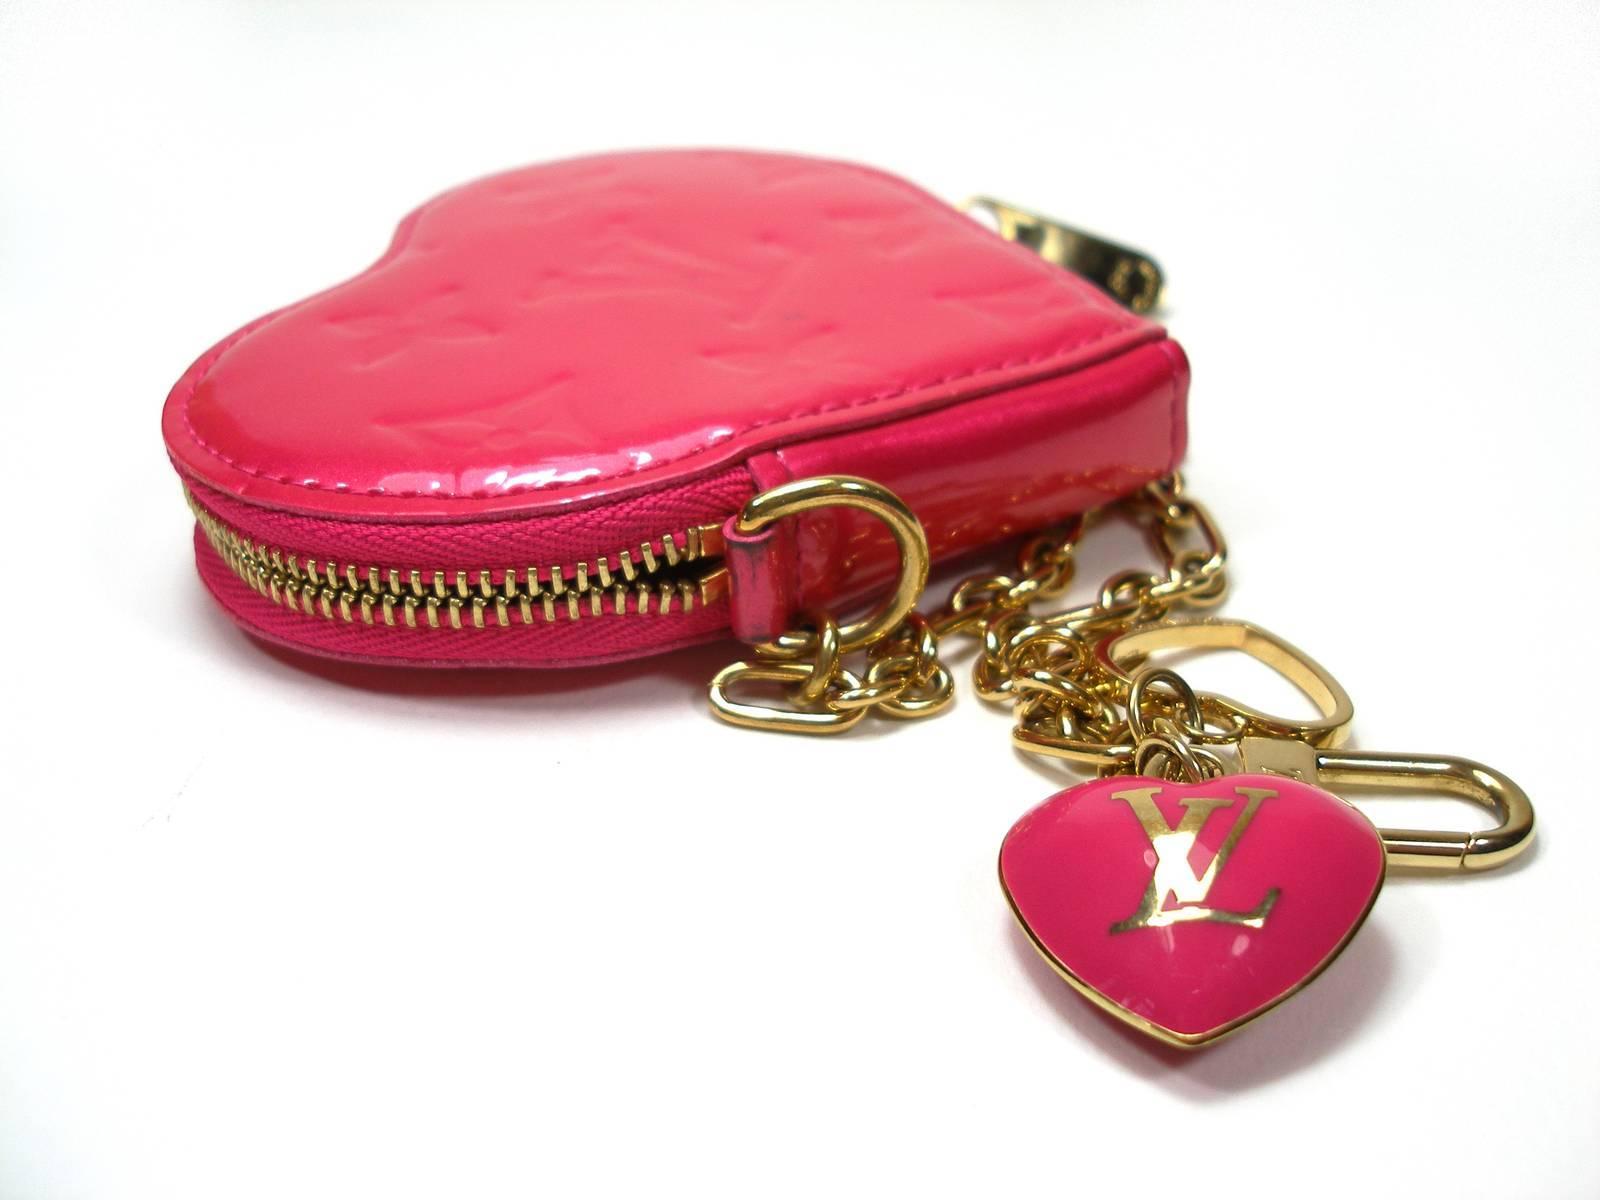 Adorable Louis Vuitton Monogram Vernis Heart Coin Purse. It is made to attach to the D-rings of LV bags and to keep your change organized in an elegant fashion
 Irresistible and feminine
 It can be used as a bag charm
Retail price : $ 525